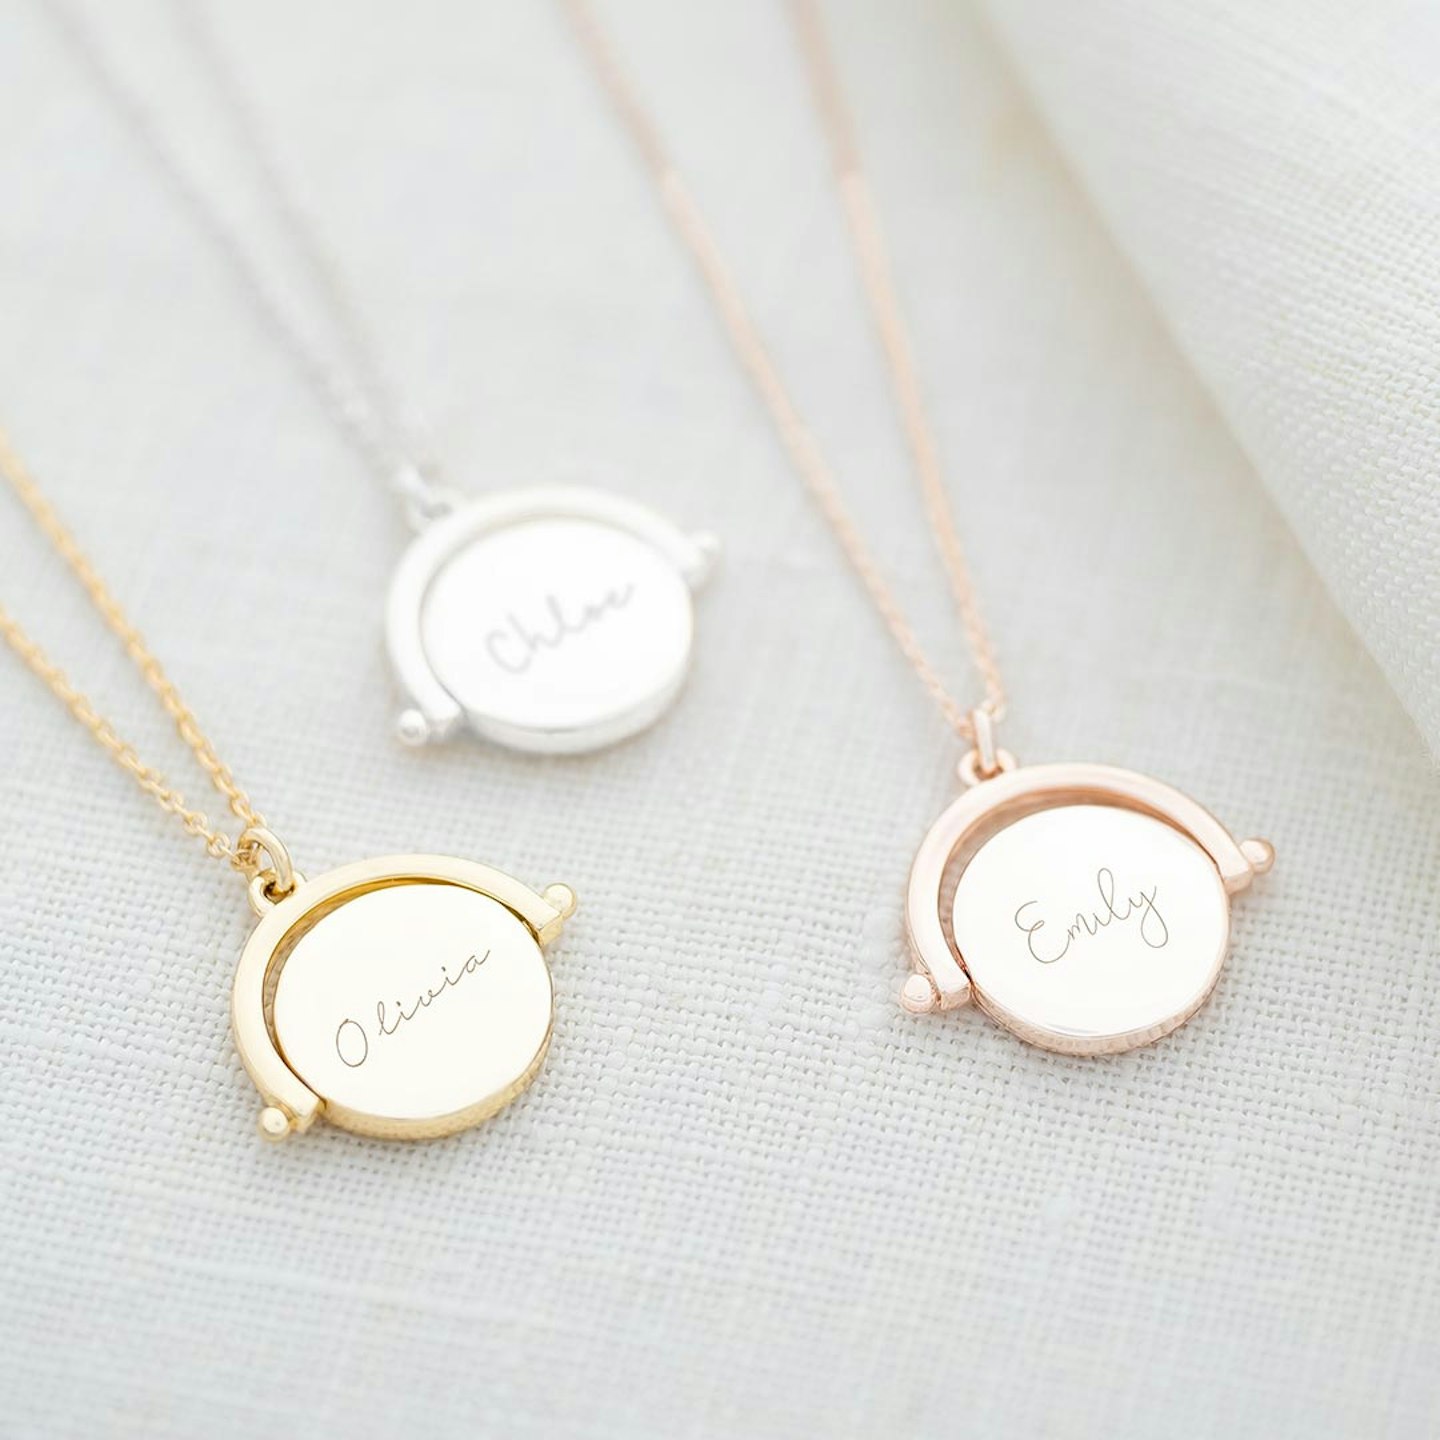 Bloom Boutique Round Spinner Personalised Name Necklace